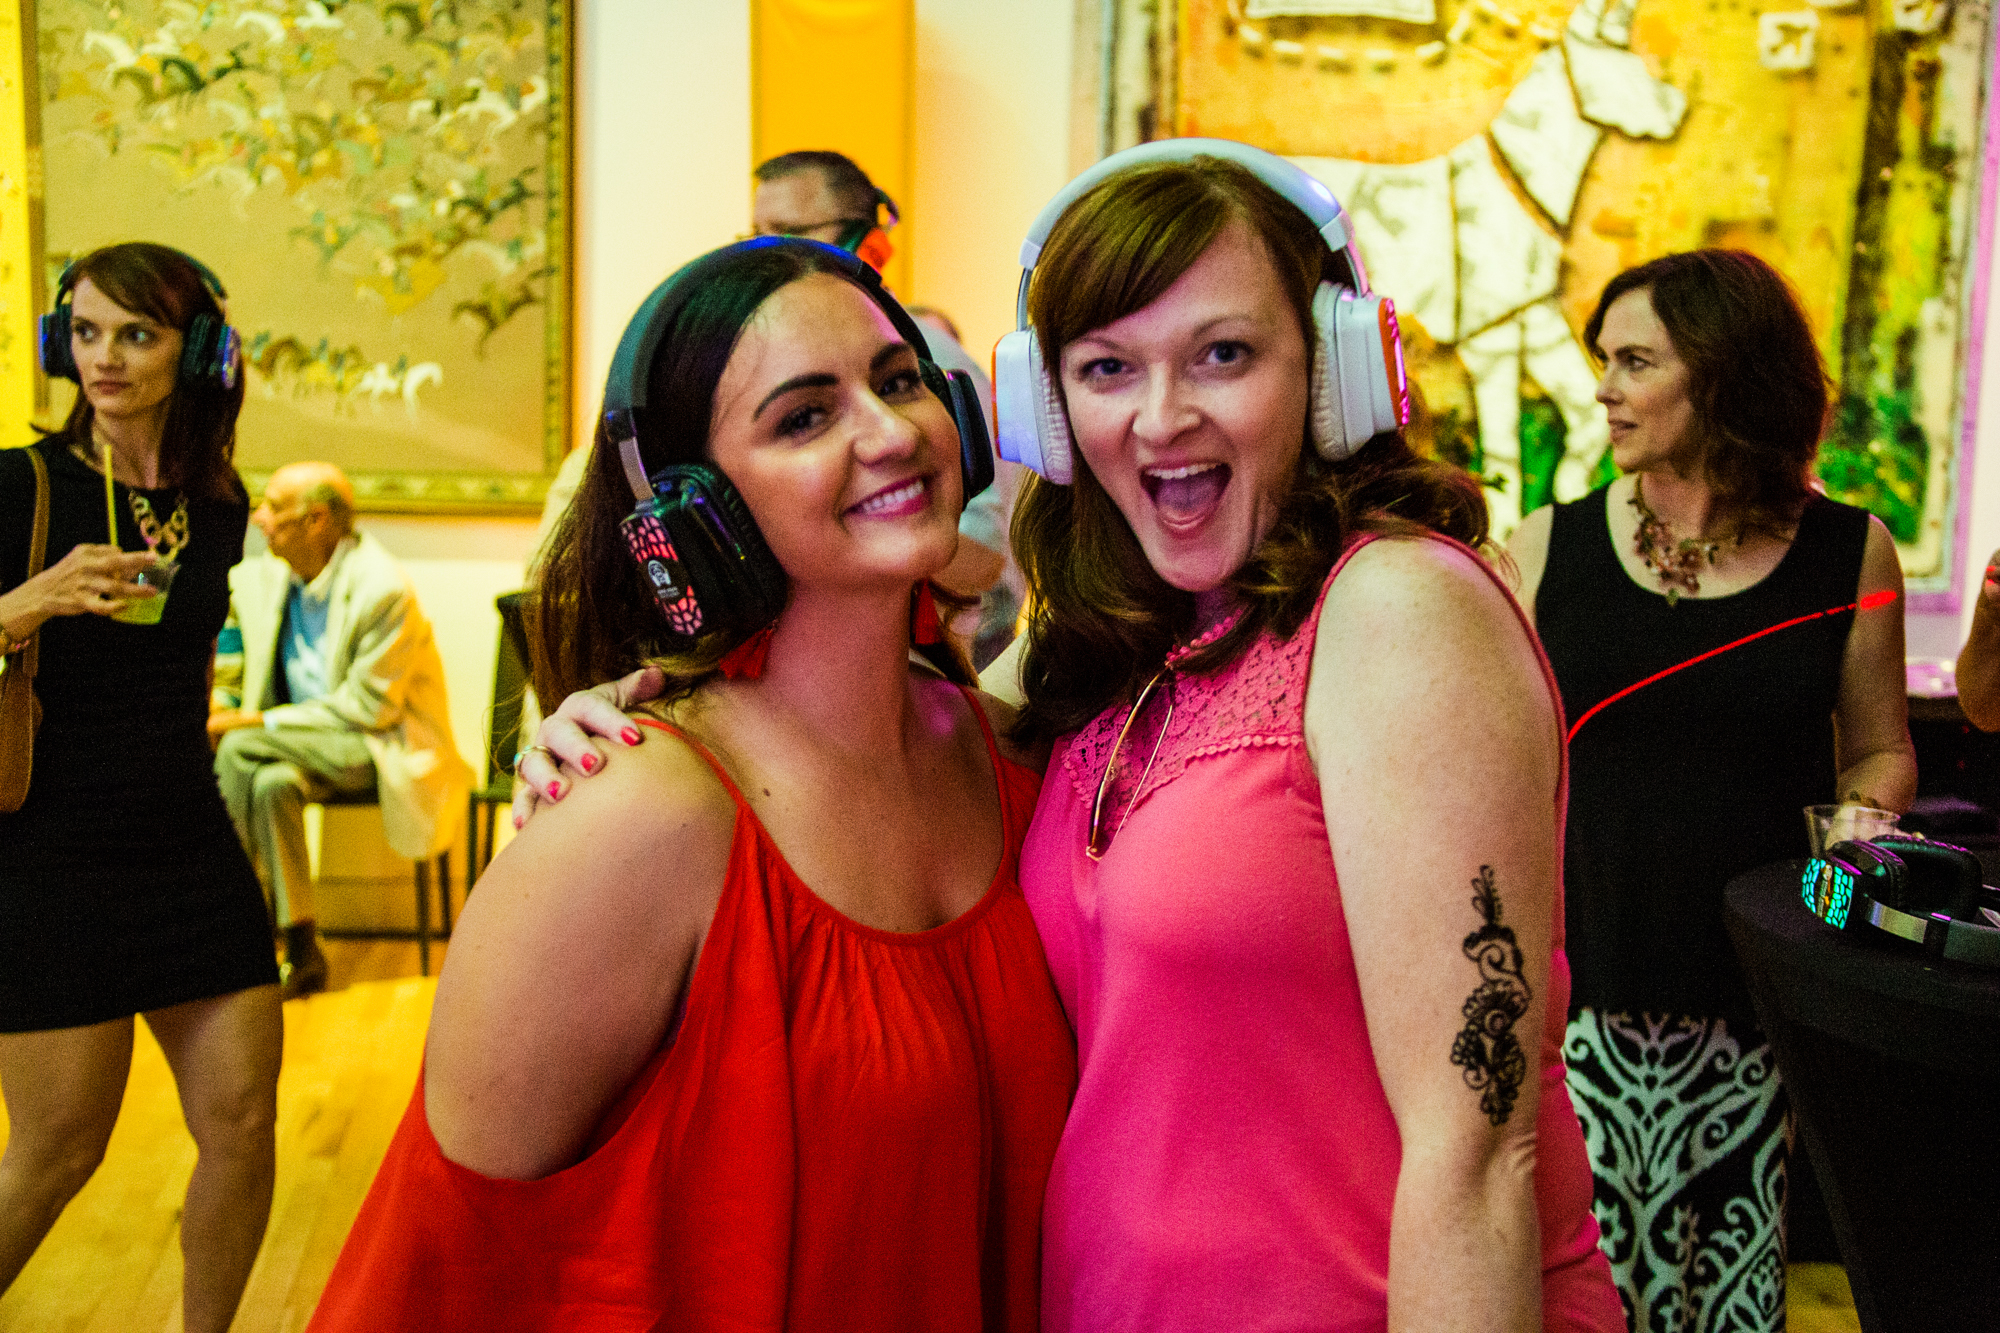 Two guests enjoying their own music at event with silent disco